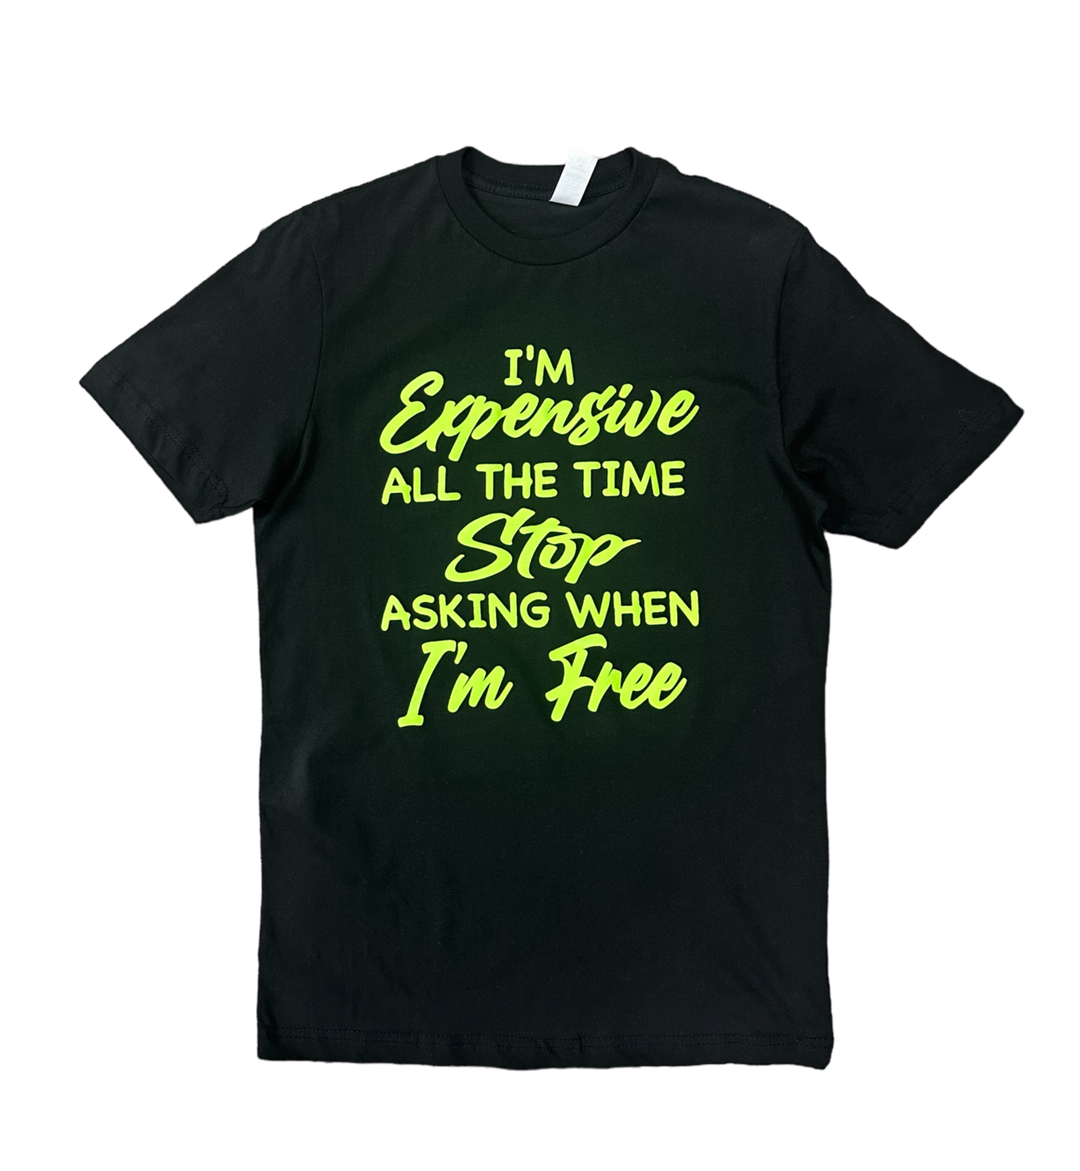 I'm Expensive All The Time Stop Asking When I'm Free T-Shirt -Black